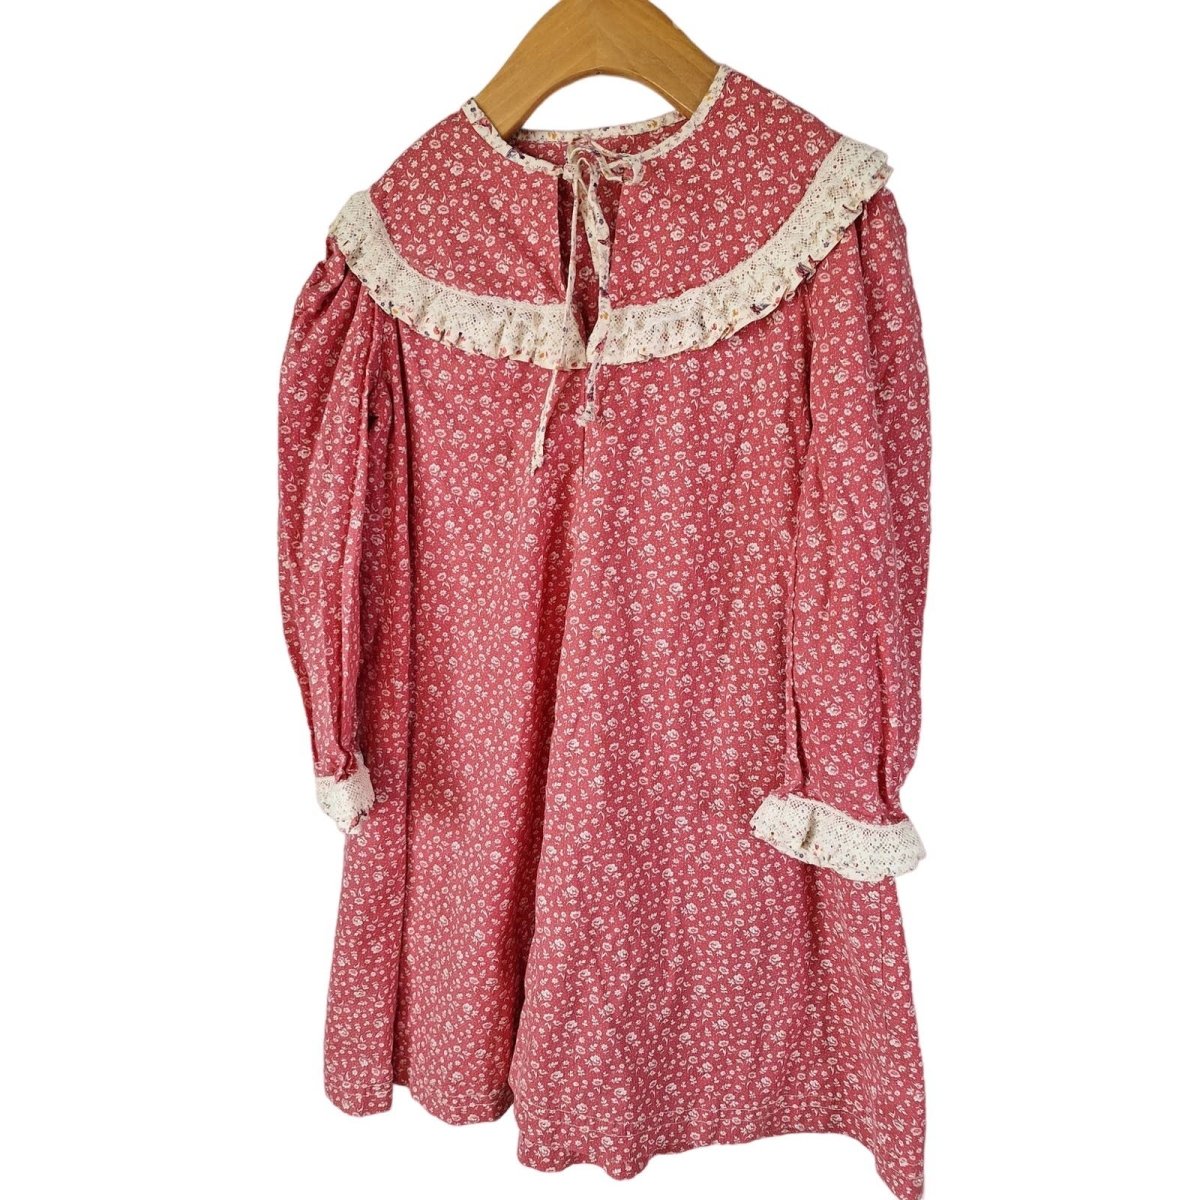 Vintage 70s/80s Mauve Pink Prairie Dress Girls Size 4-ish Chest 28" Length 26" - themallvintage The Mall Vintage